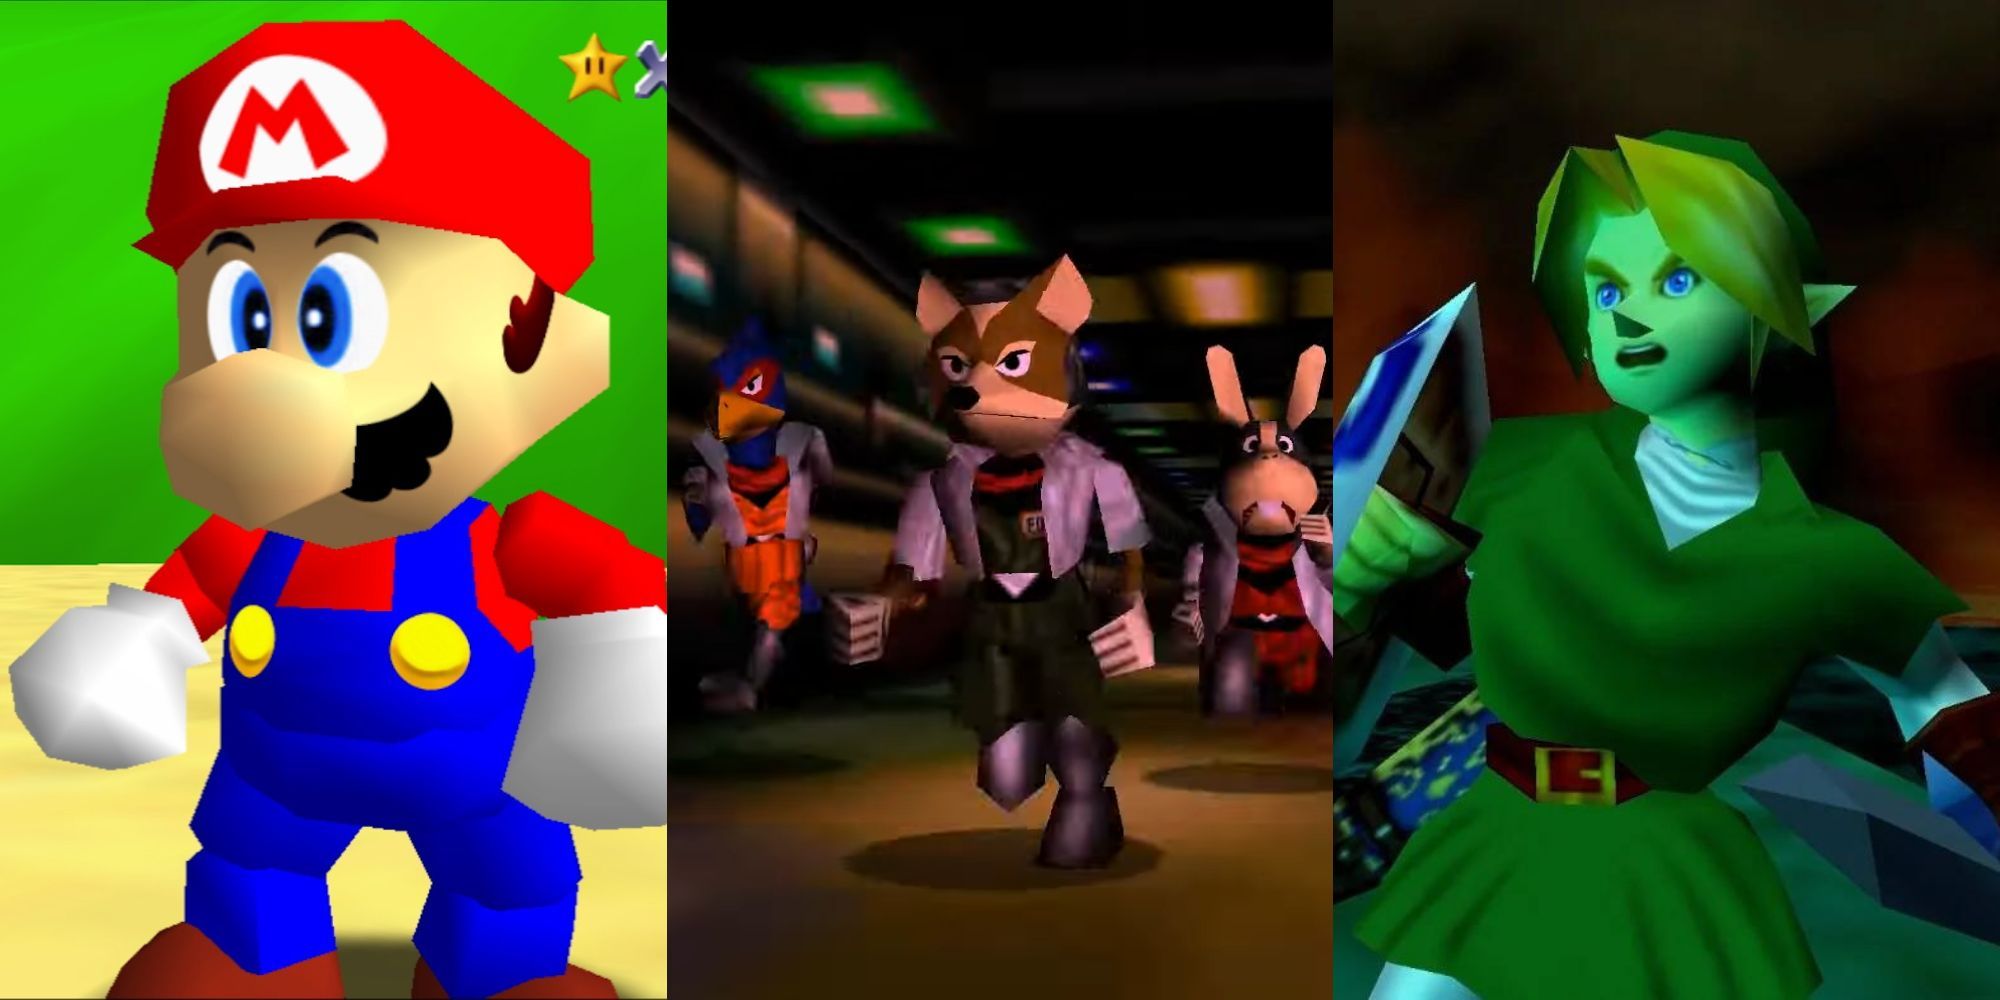 A collage with some of the best Nintendo 64 games: Super Mario 64, Star Fox 64 and The Legend of Zelda: Ocarina of Time.